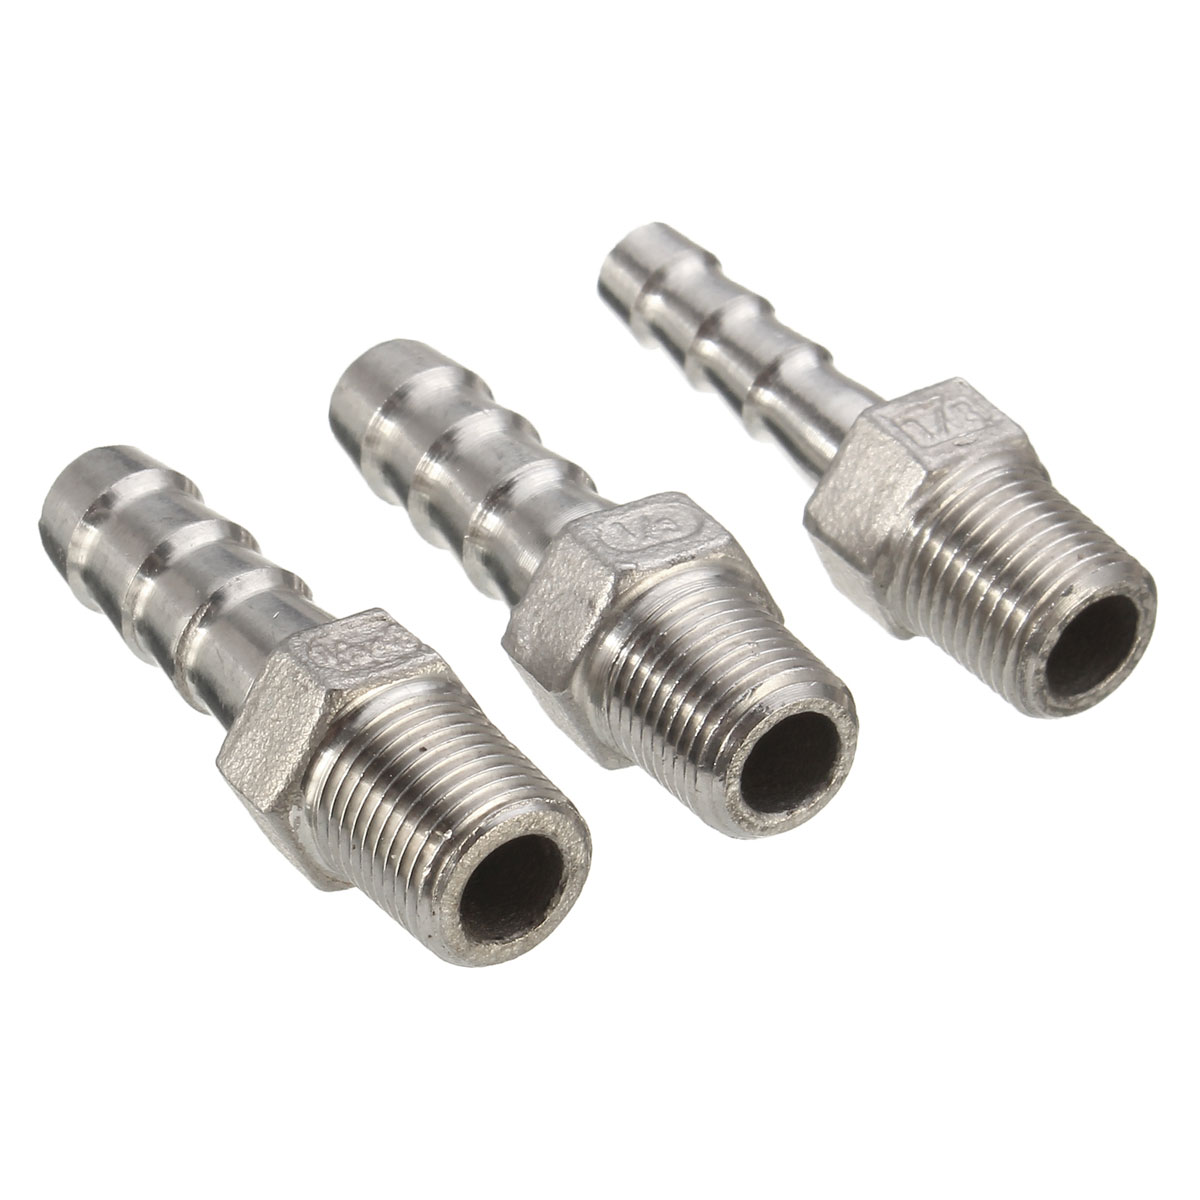 18-Inch-Stainless-Steel-Hose-Tails-Barb-Connector-BSPT-Thread-Pipe-Adapter-1716150-3